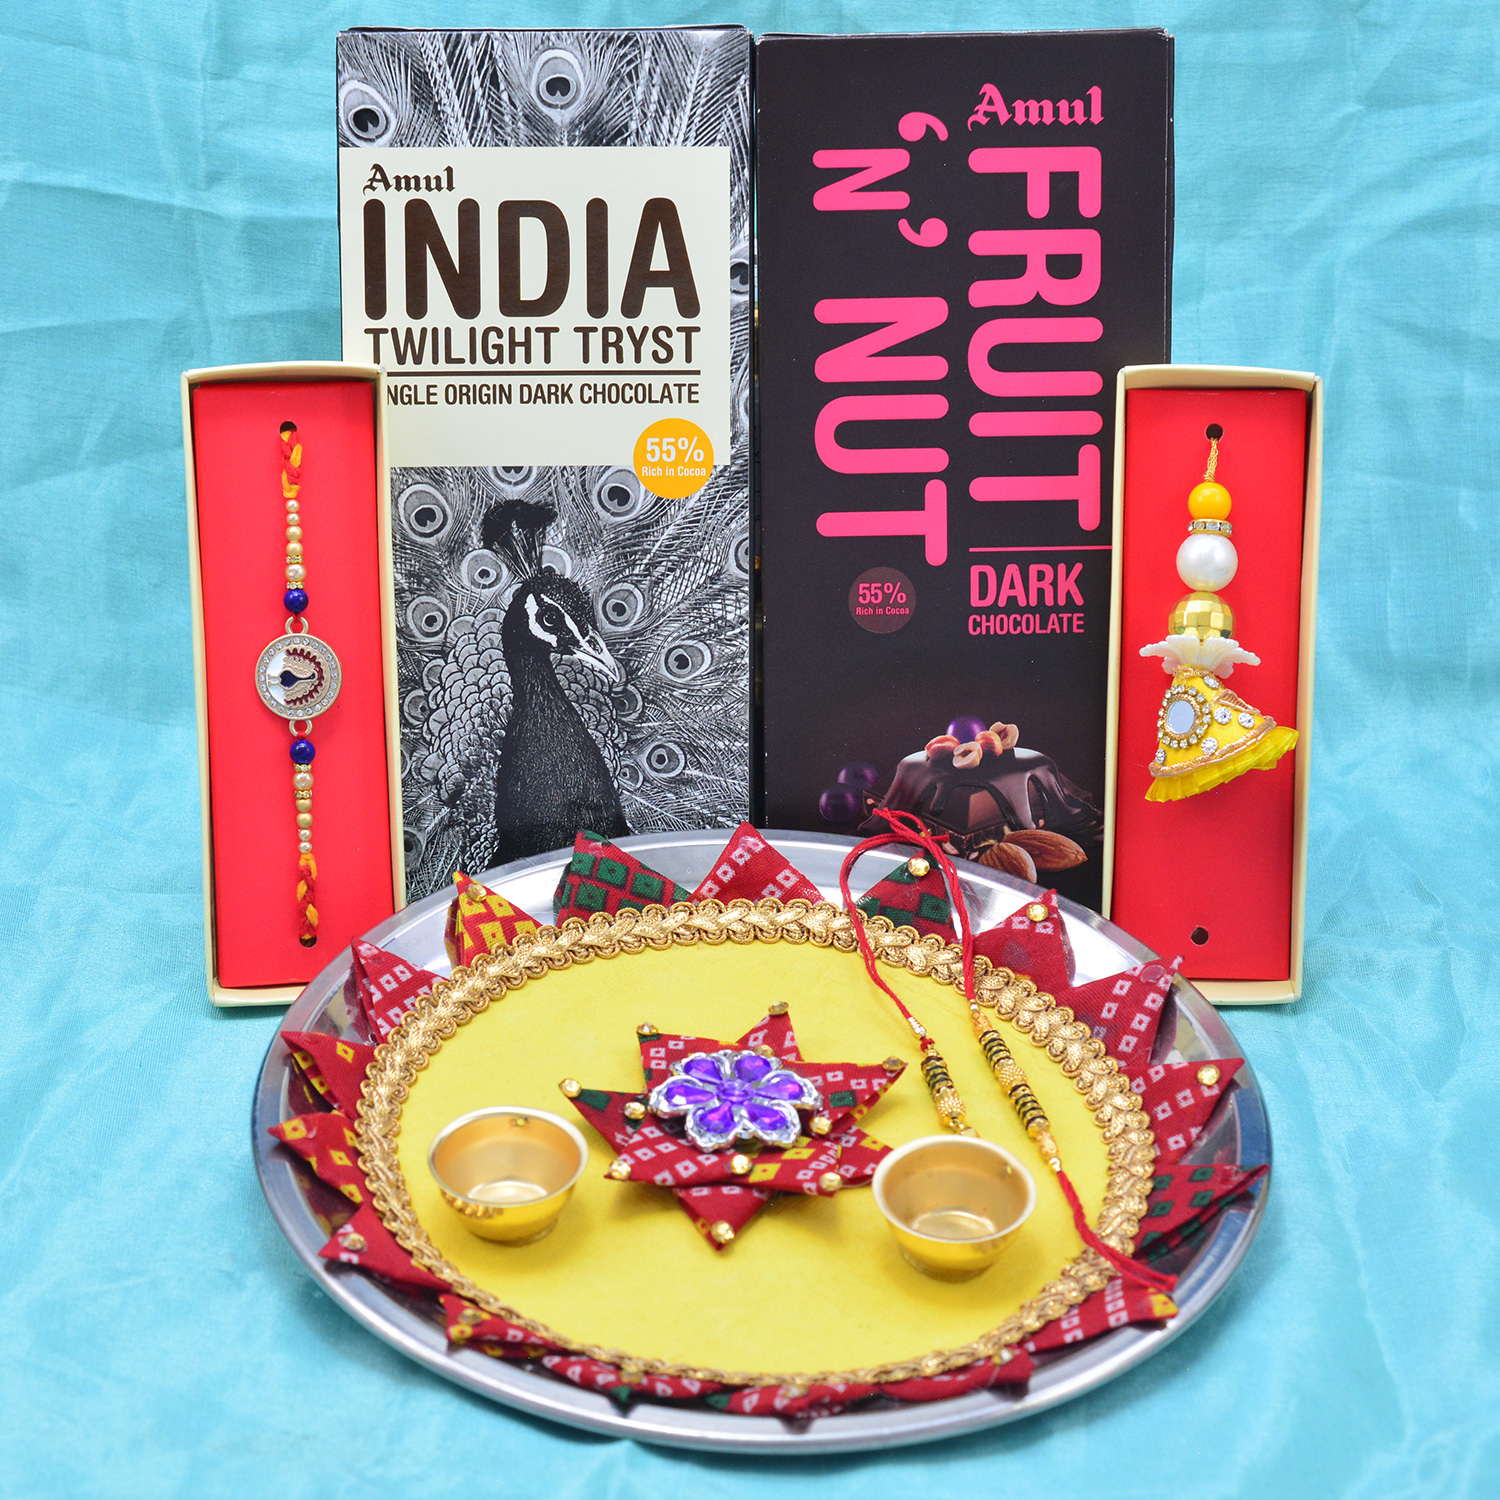 Amul Fruit and Nut with Twilight Tryst Chocolates Hamper with Stunning Looking Yellow Rakhi Puja Thali